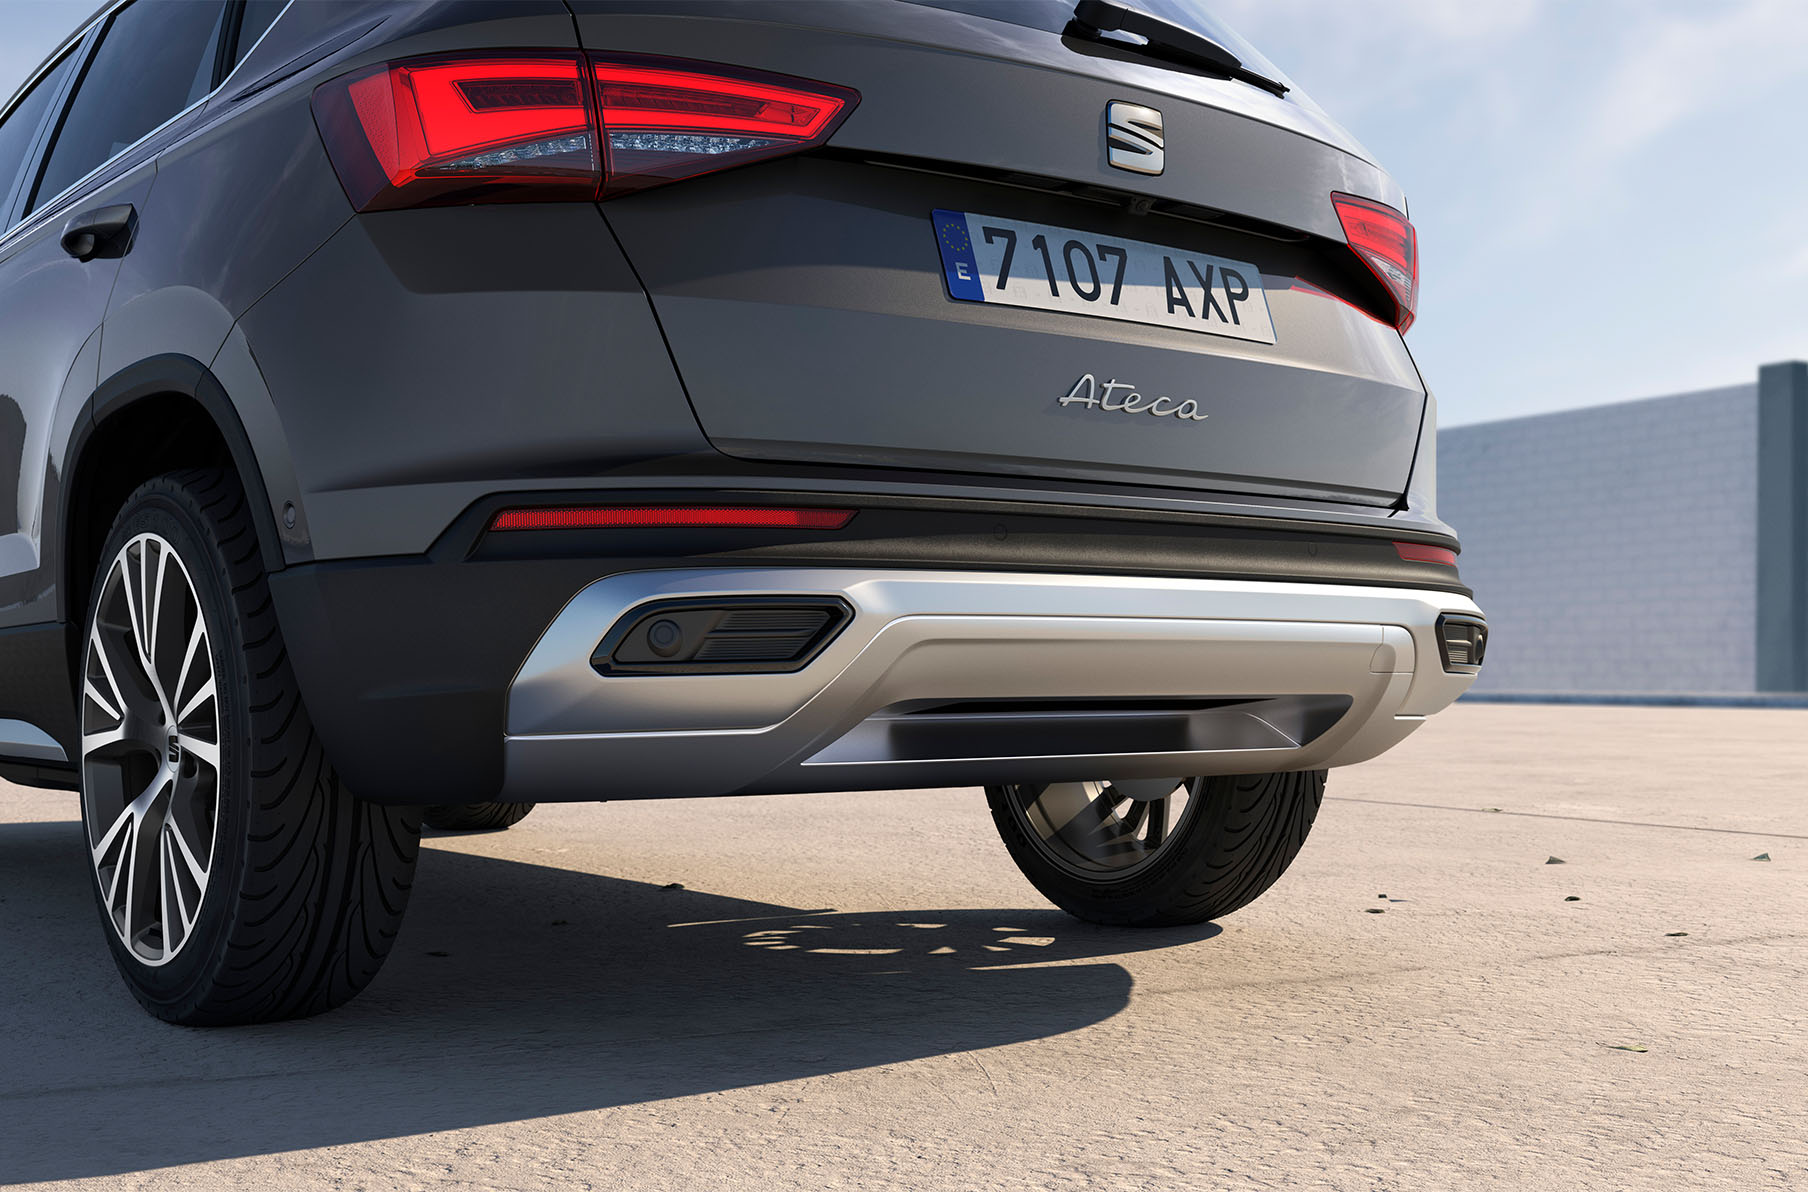 seat ateca graphite grey colour with rear  exhaust pipes